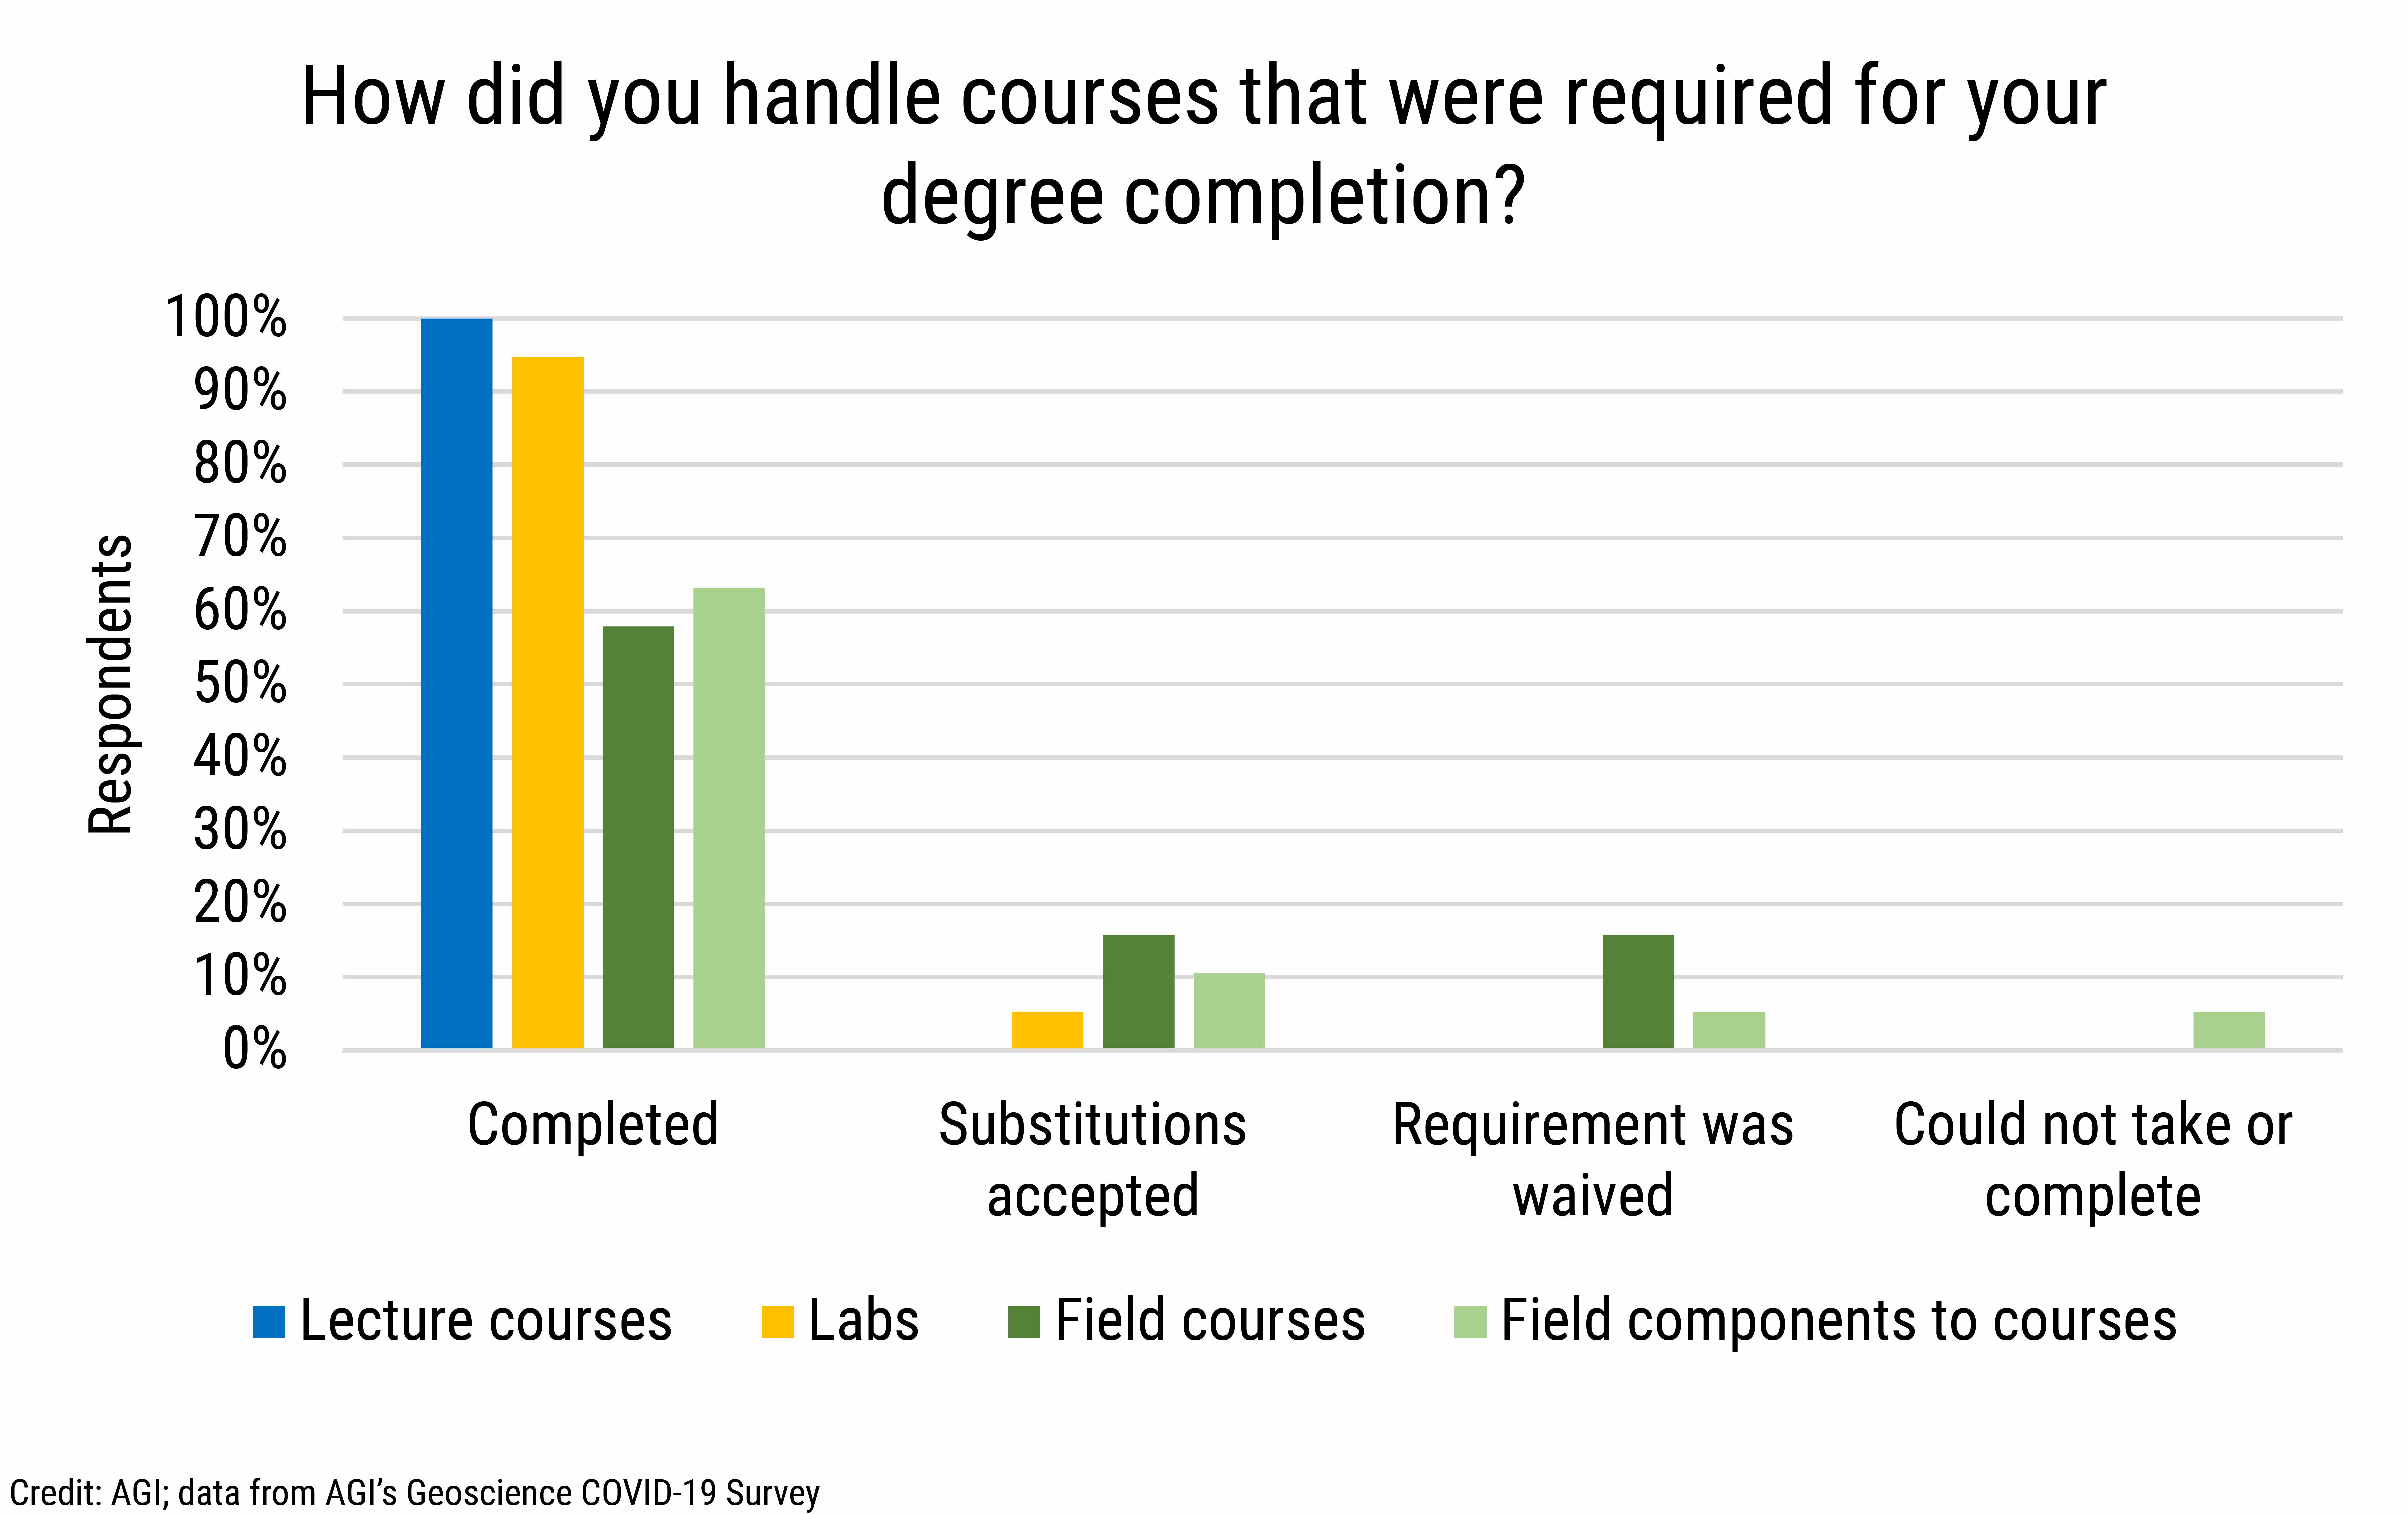 DB_2021-026 chart 02: How did you handle courses that were required for your degree completion? (Credit: AGI; data from AGI's Geoscience COVID-19 Survey)